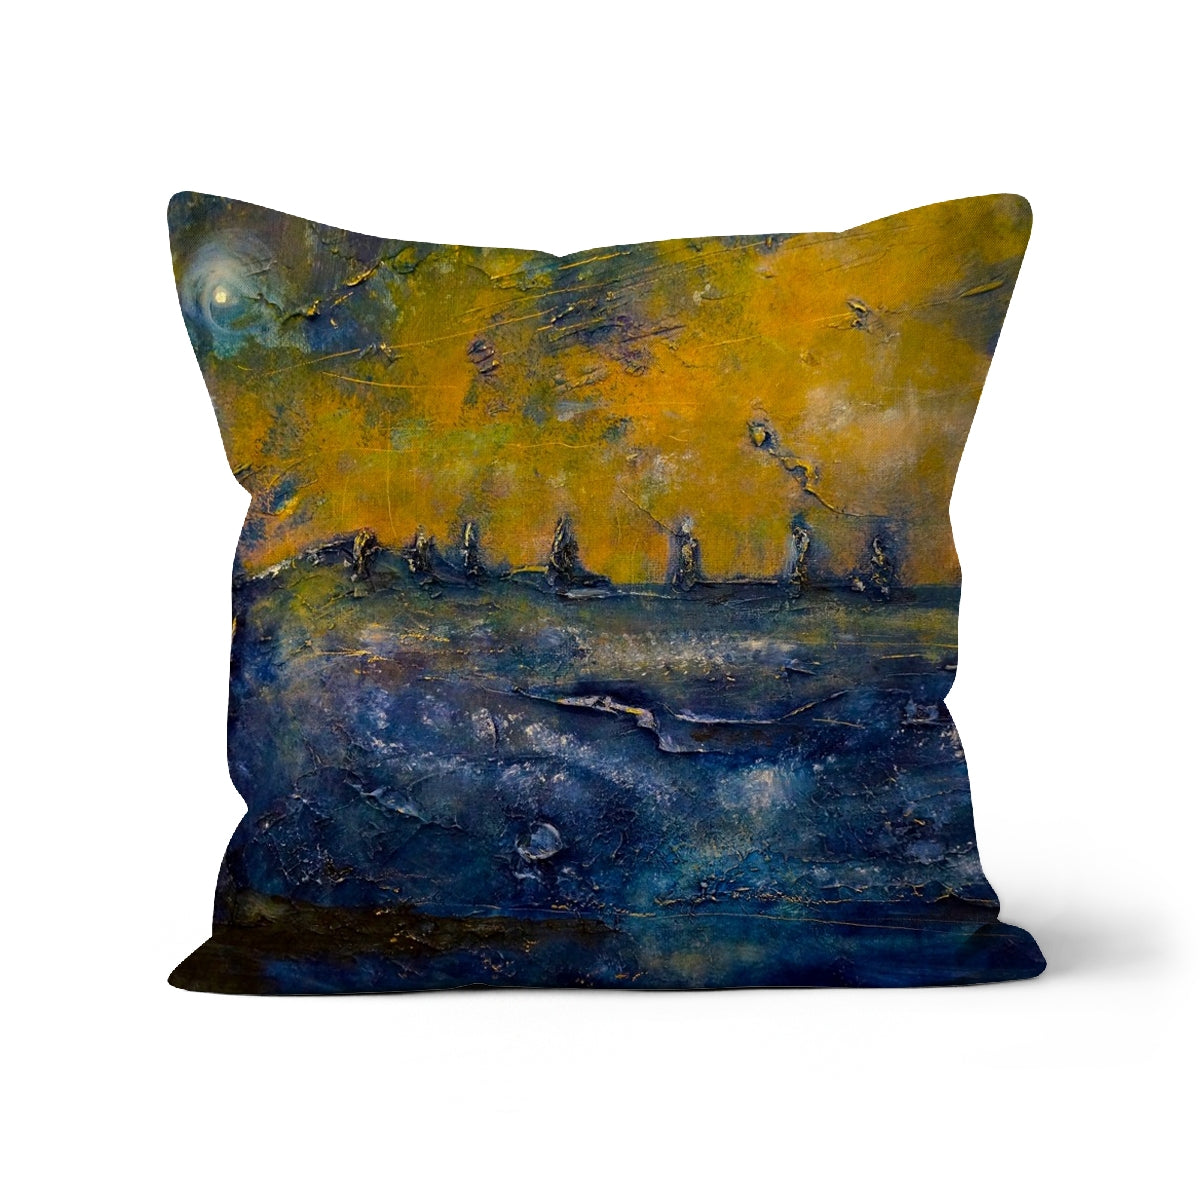 Brodgar Moonlight Orkney Art Gifts Cushion-Cushions-Orkney Art Gallery-Faux Suede-12"x12"-Paintings, Prints, Homeware, Art Gifts From Scotland By Scottish Artist Kevin Hunter